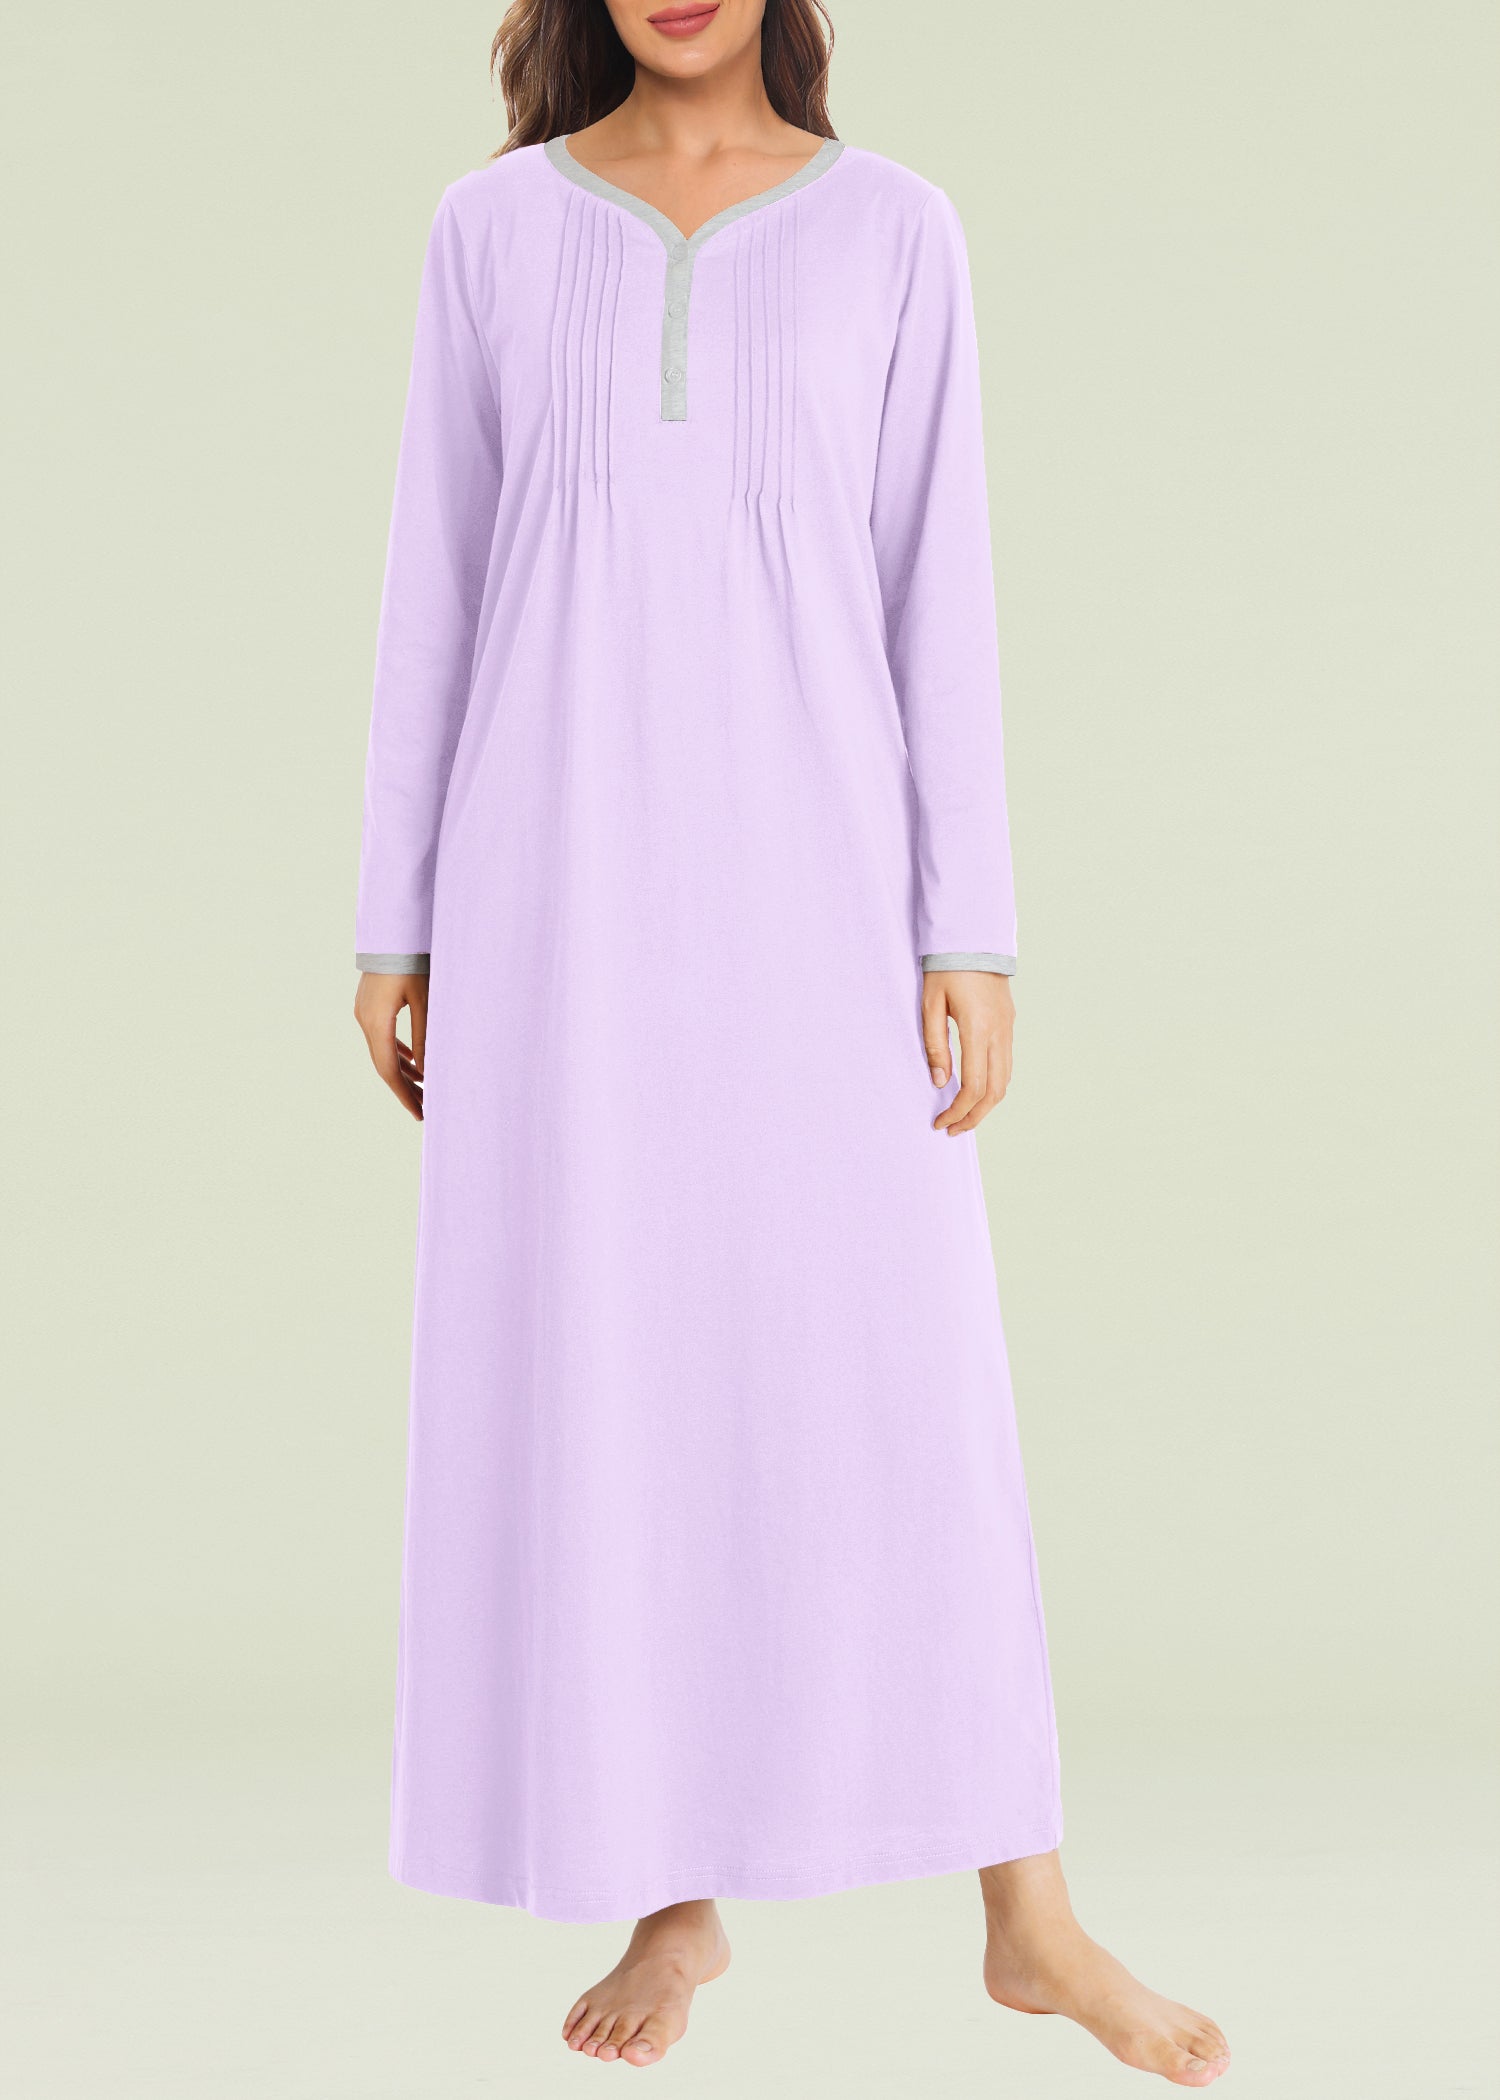 Calida Cotton Knit Nightgown - Womens Long Sleeve Sleep Gown